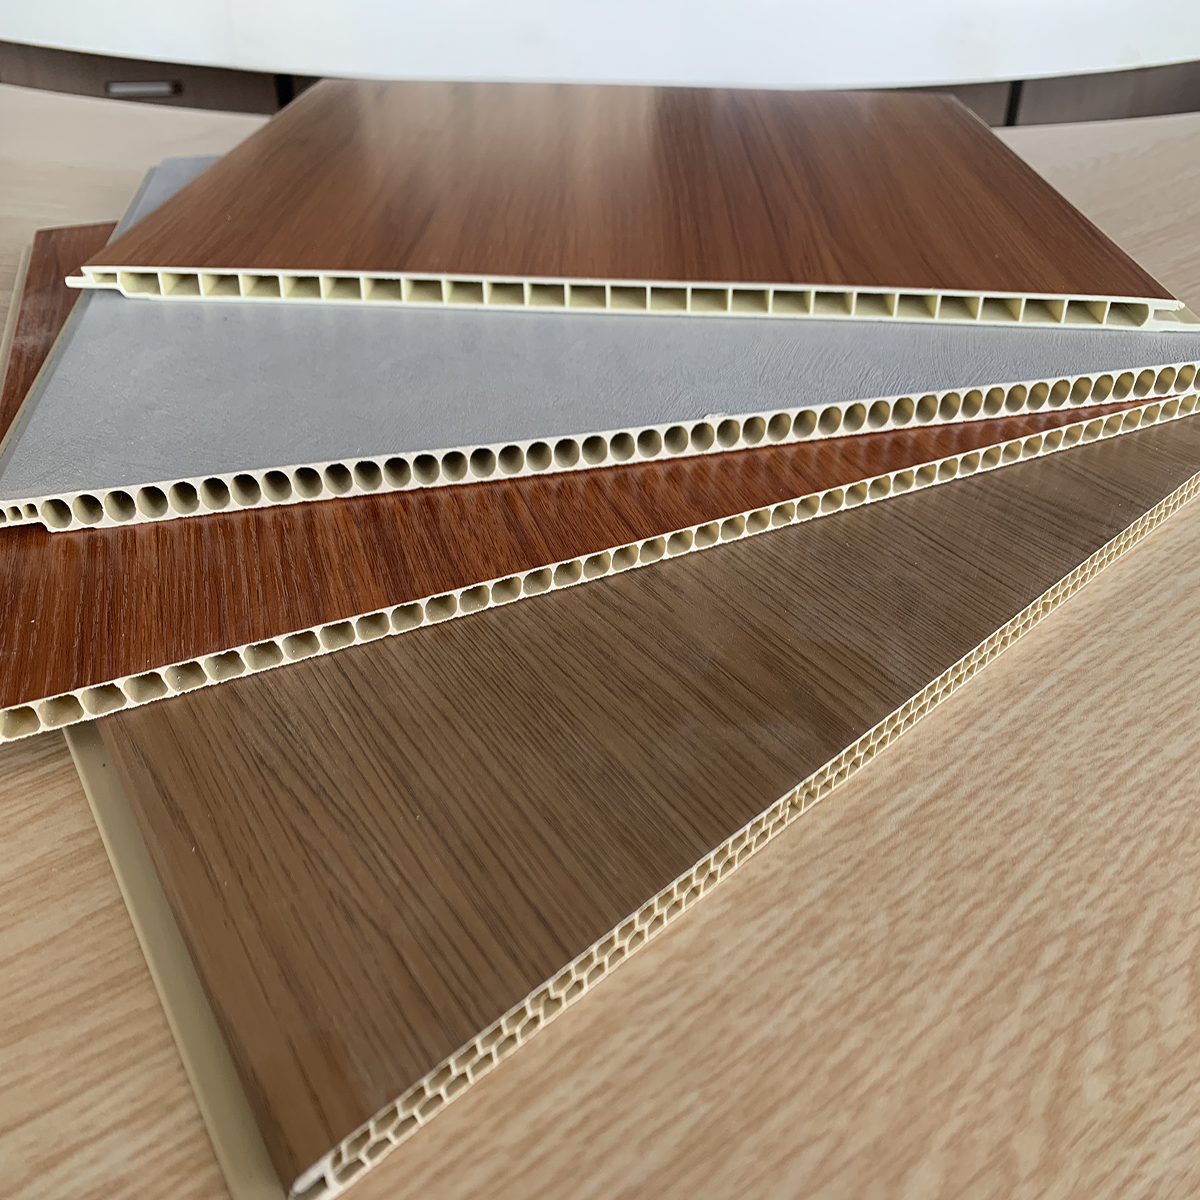 China Gold Supplier for Floor Skirting Board - Cheap price Building Construction Material Plastic/Wood/Wooden/Stone/Composite/Aluminum 3D/Print Color Spc/PVC/WPC Vinyl Wall/Cladding/Ceiling/Sandwi...